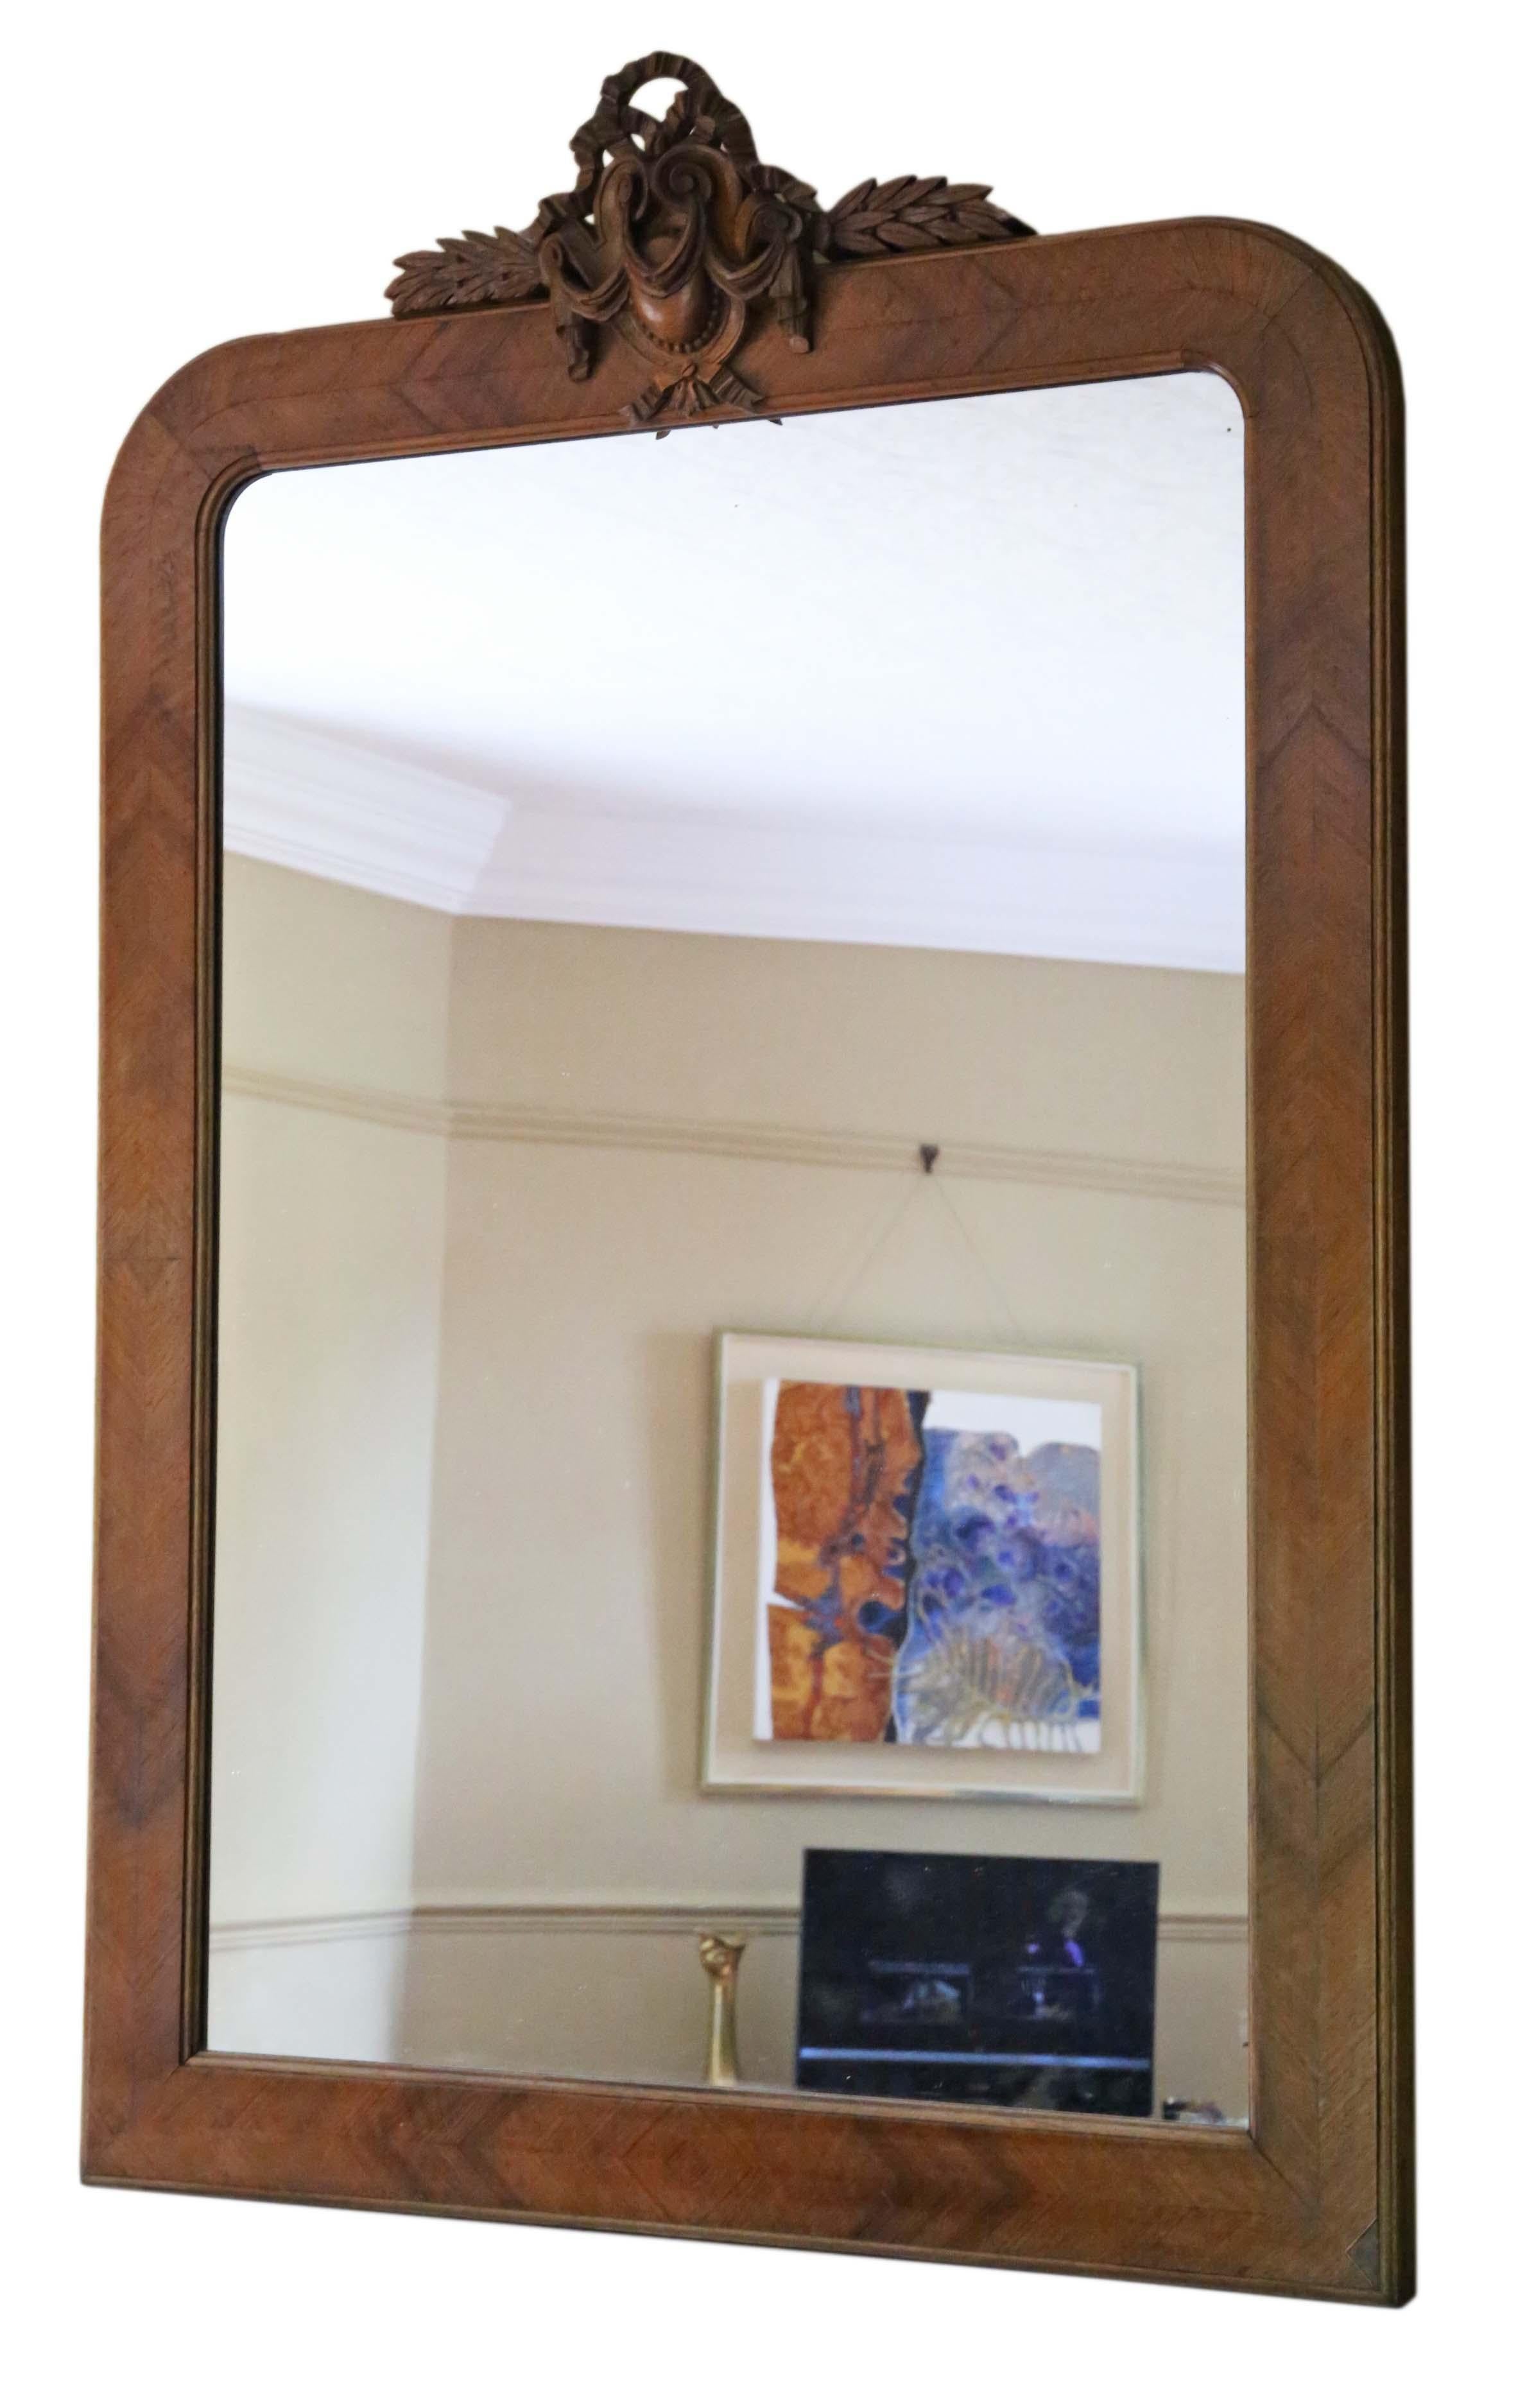 Antique large fine quality walnut overmantle wall mirror, circa 1900. Lovely charm and elegance, with a great carved crest.

An impressive and rare find, that would look amazing in the right location. No loose joints.

The mirrored glass has